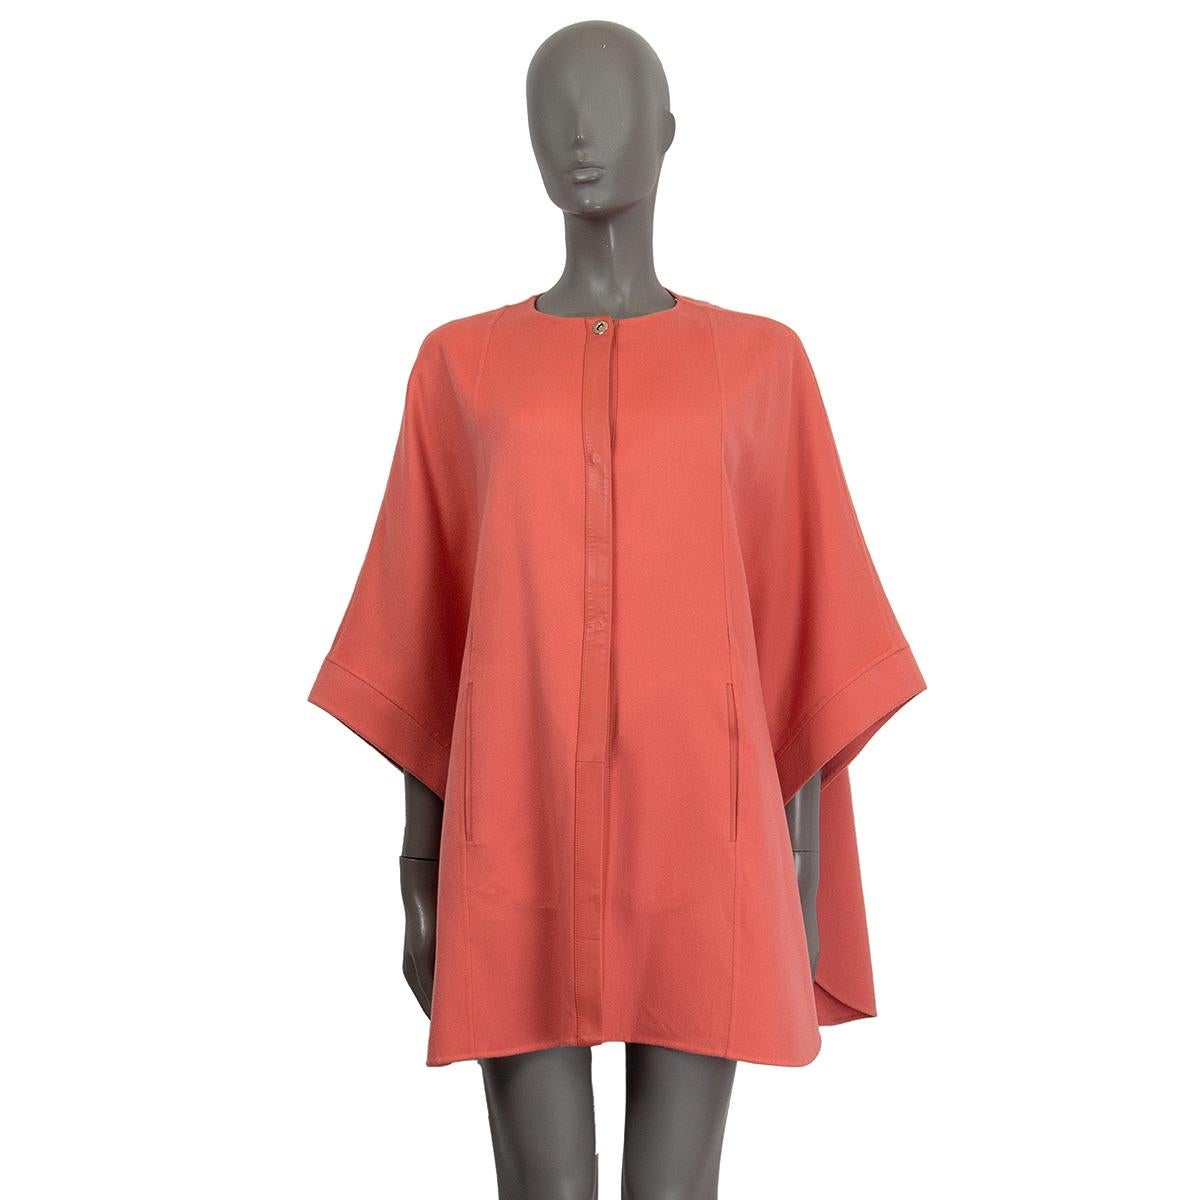 Loro Piana 'Margot' leather trim cape in salmon cashmere (100%) with a round neck and slit pockets. Closes on the front with snap buttons. Unlined. Has been worn and is in excellent condition. Short sleeves have a snap button closing at the botton